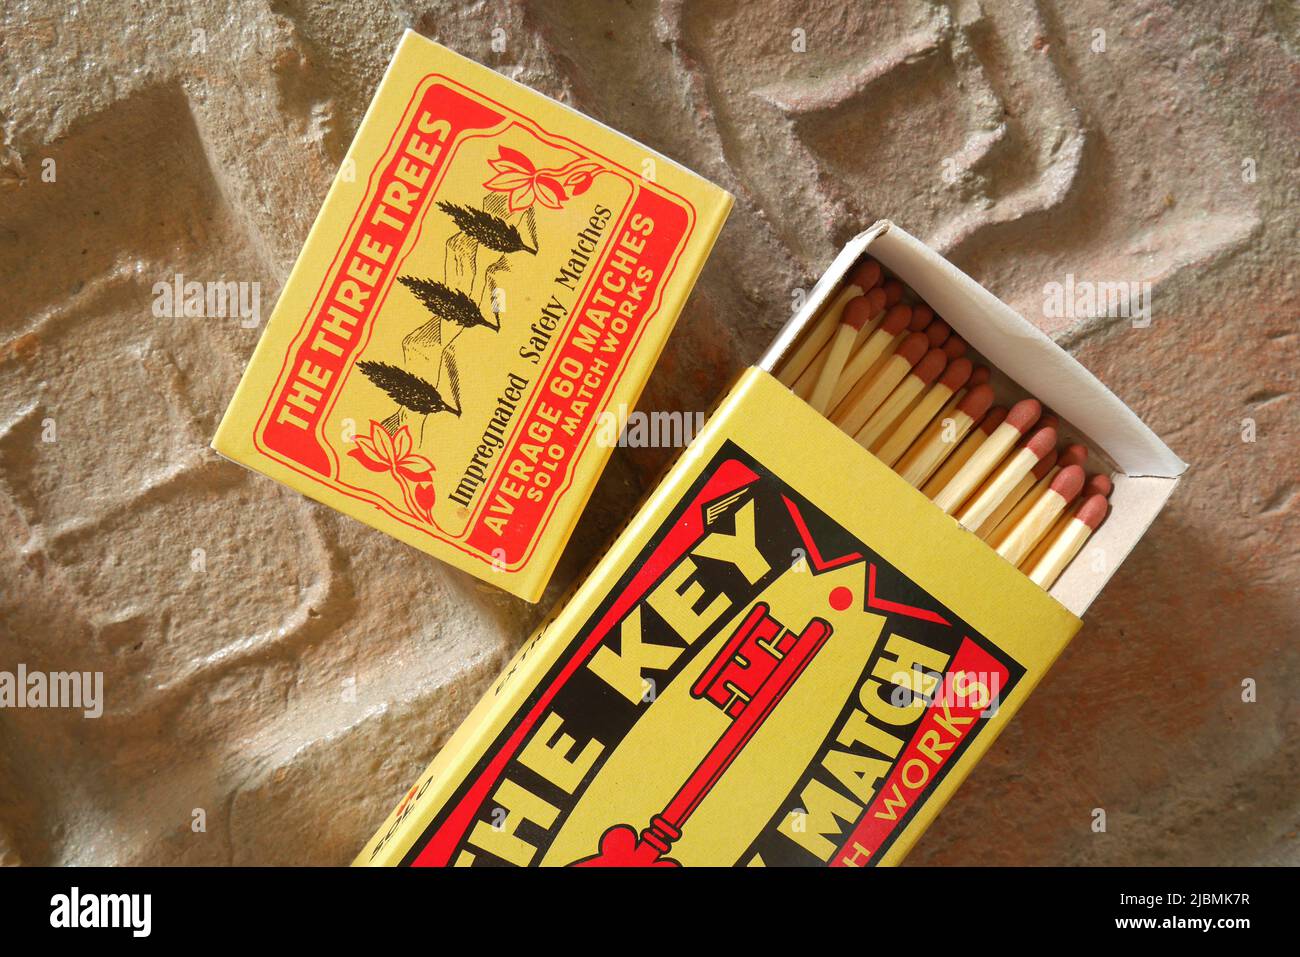 Boxes of Czech safety matches, brands, the Three Trees and the Key Stock Photo